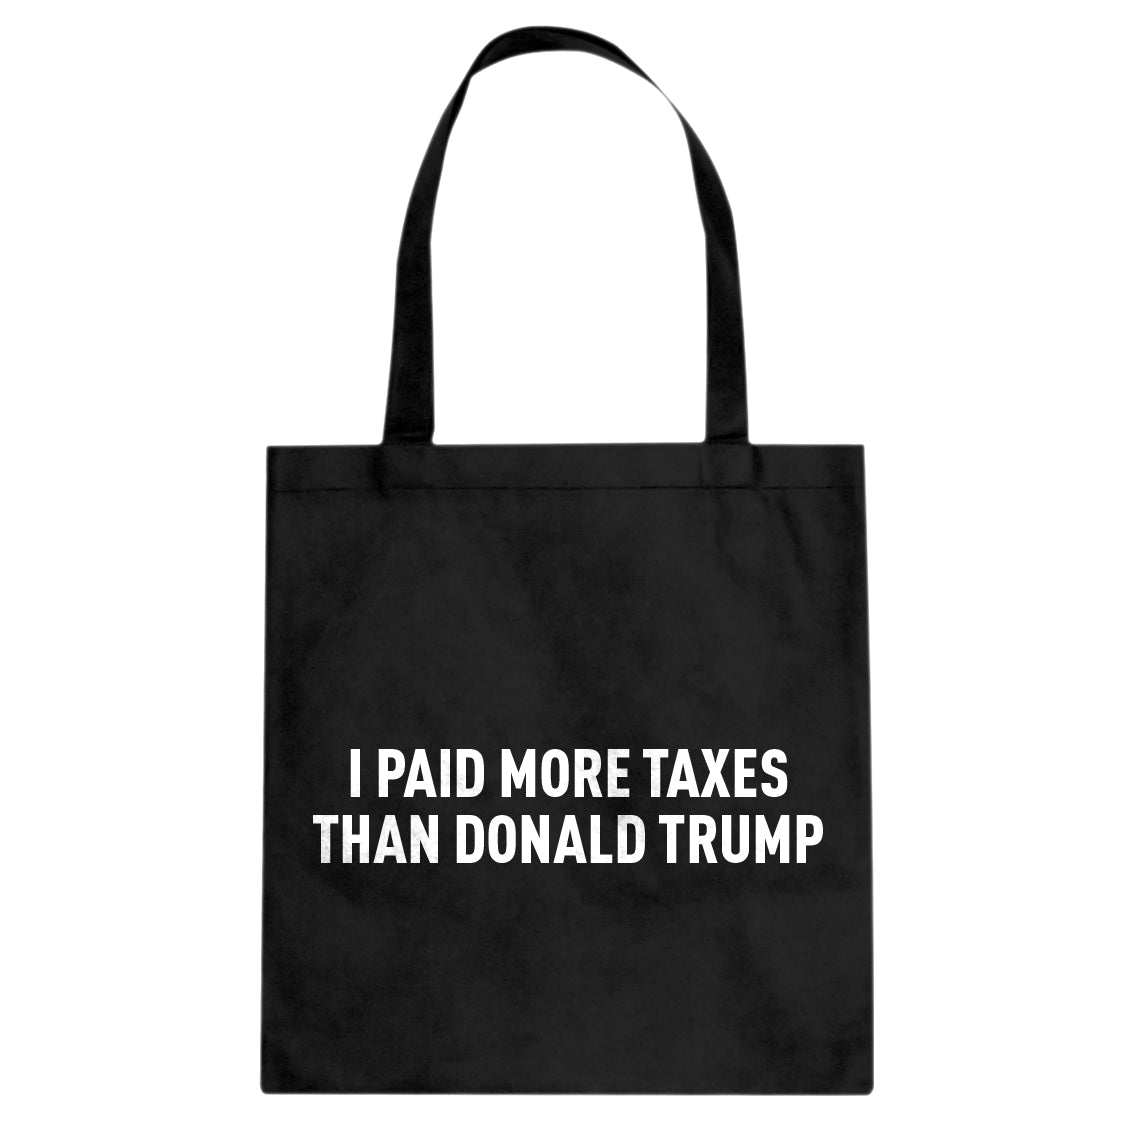 I PAID MORE TAXES THAN DONALD TRUMP Cotton Canvas Tote Bag